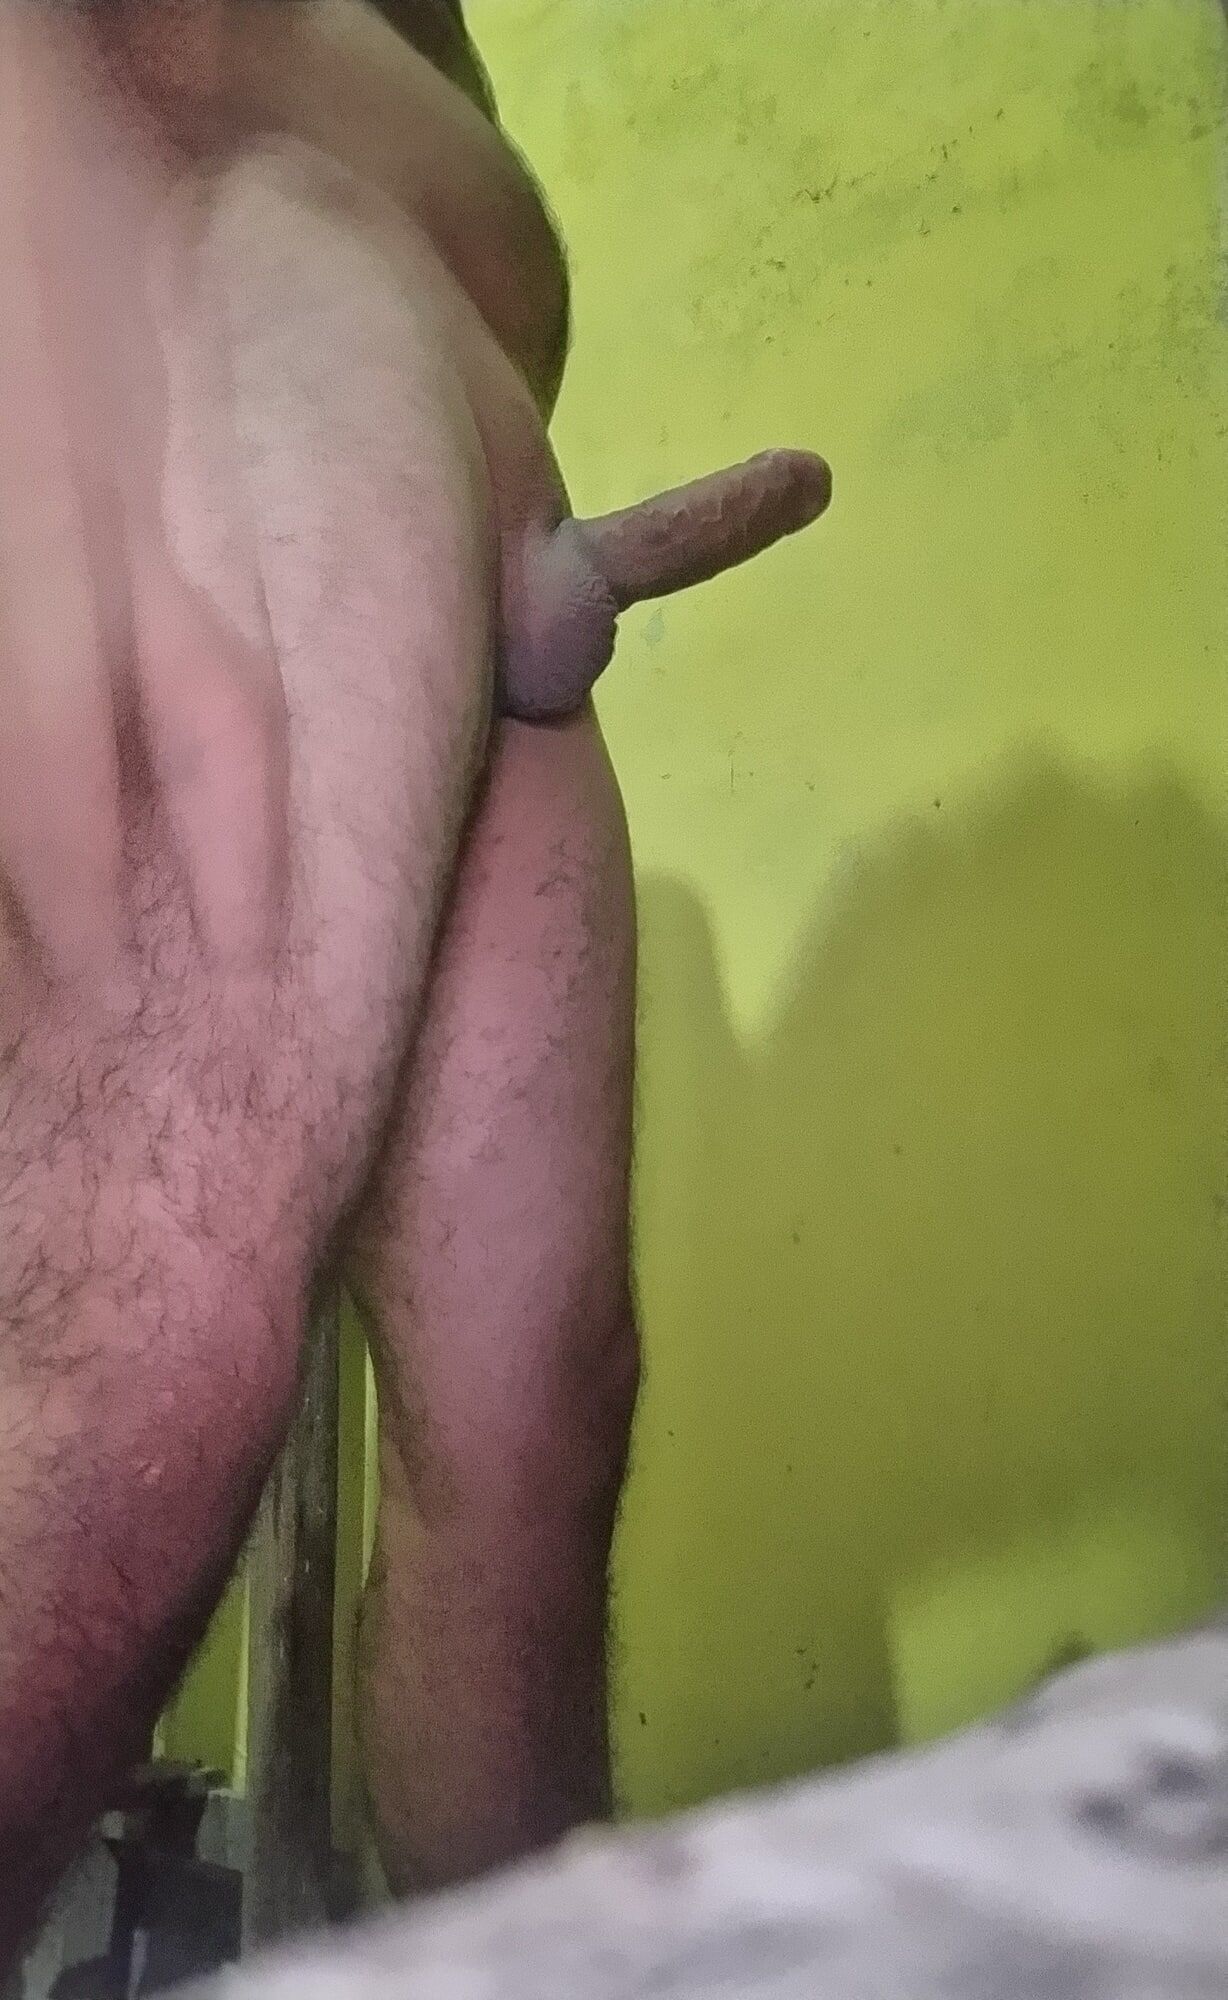 SHAVED INDIAN BIG AND THICK DICK 💦 #10